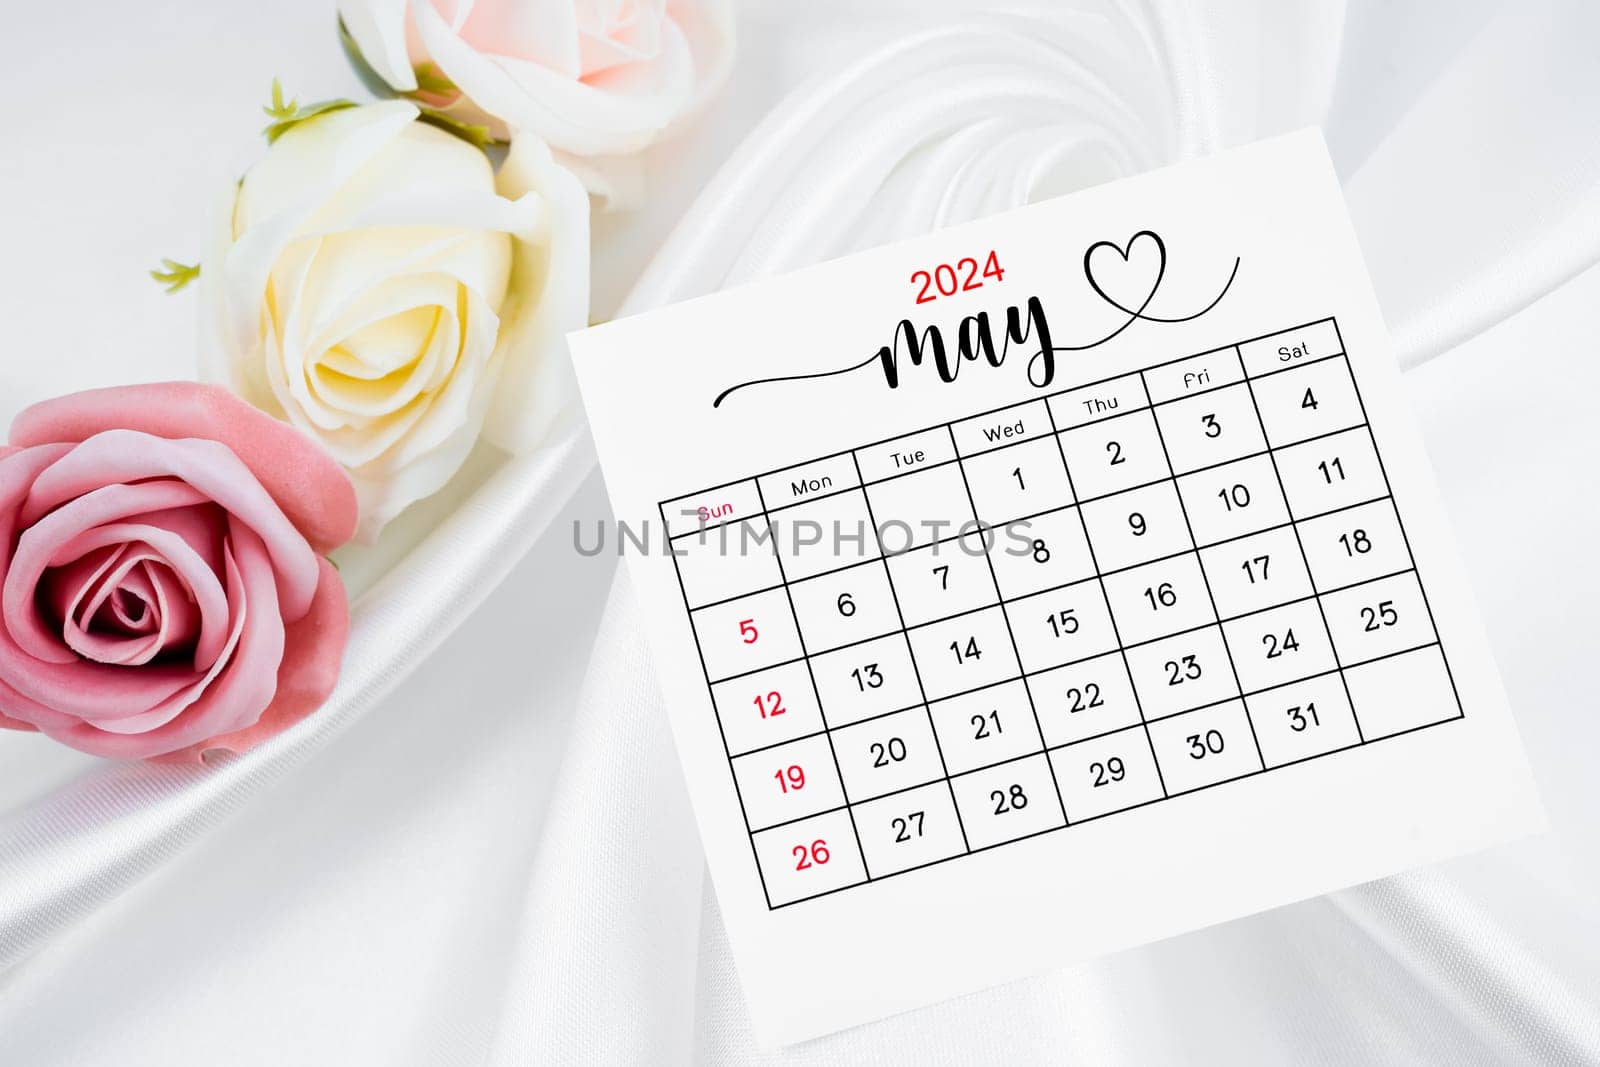 May 2024 calendar page and rose flower on white satin textile background.